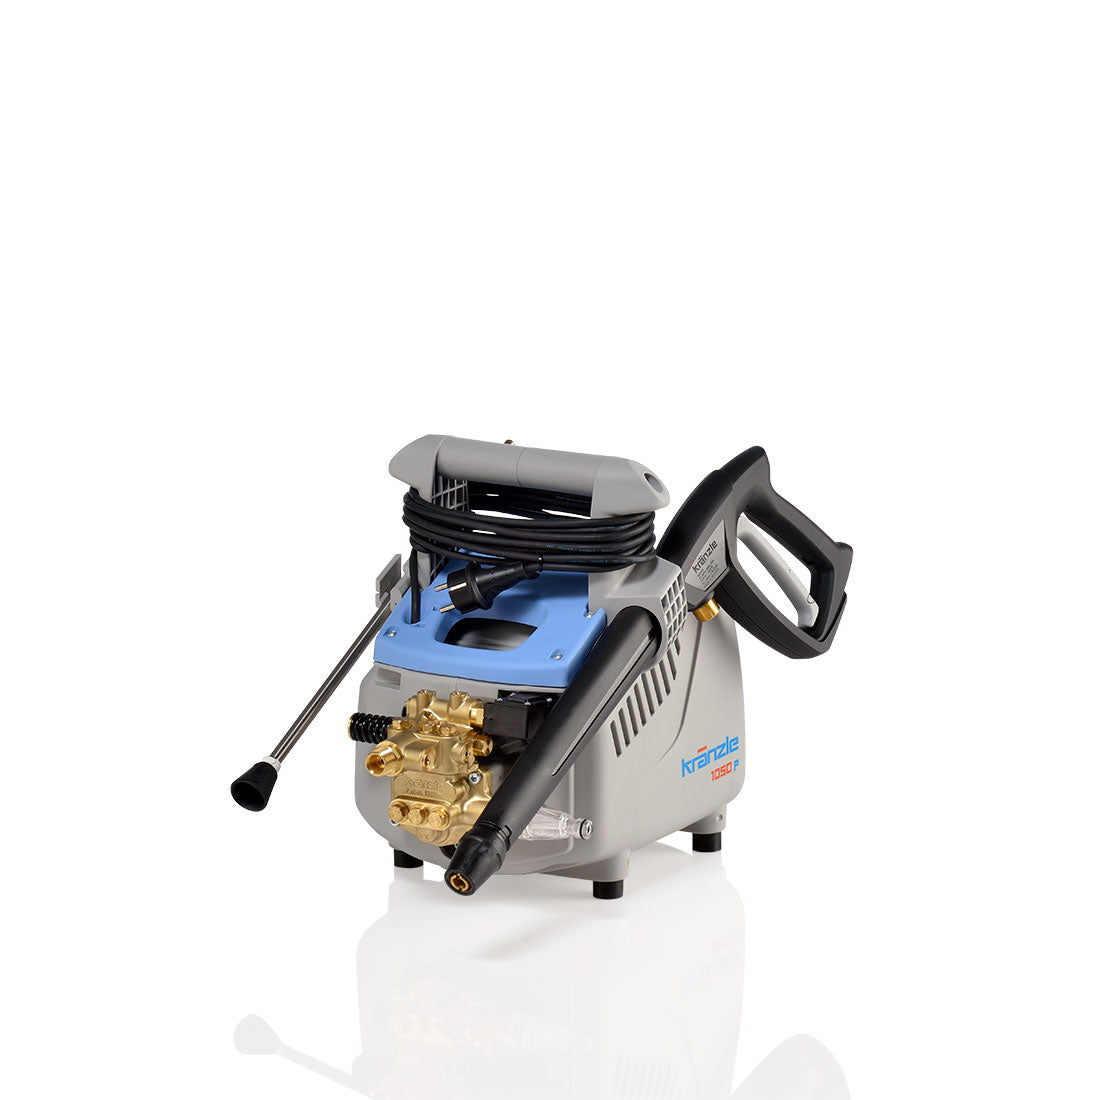 Kranzle 1050 - Home Use Pressure Washer (Options Available)